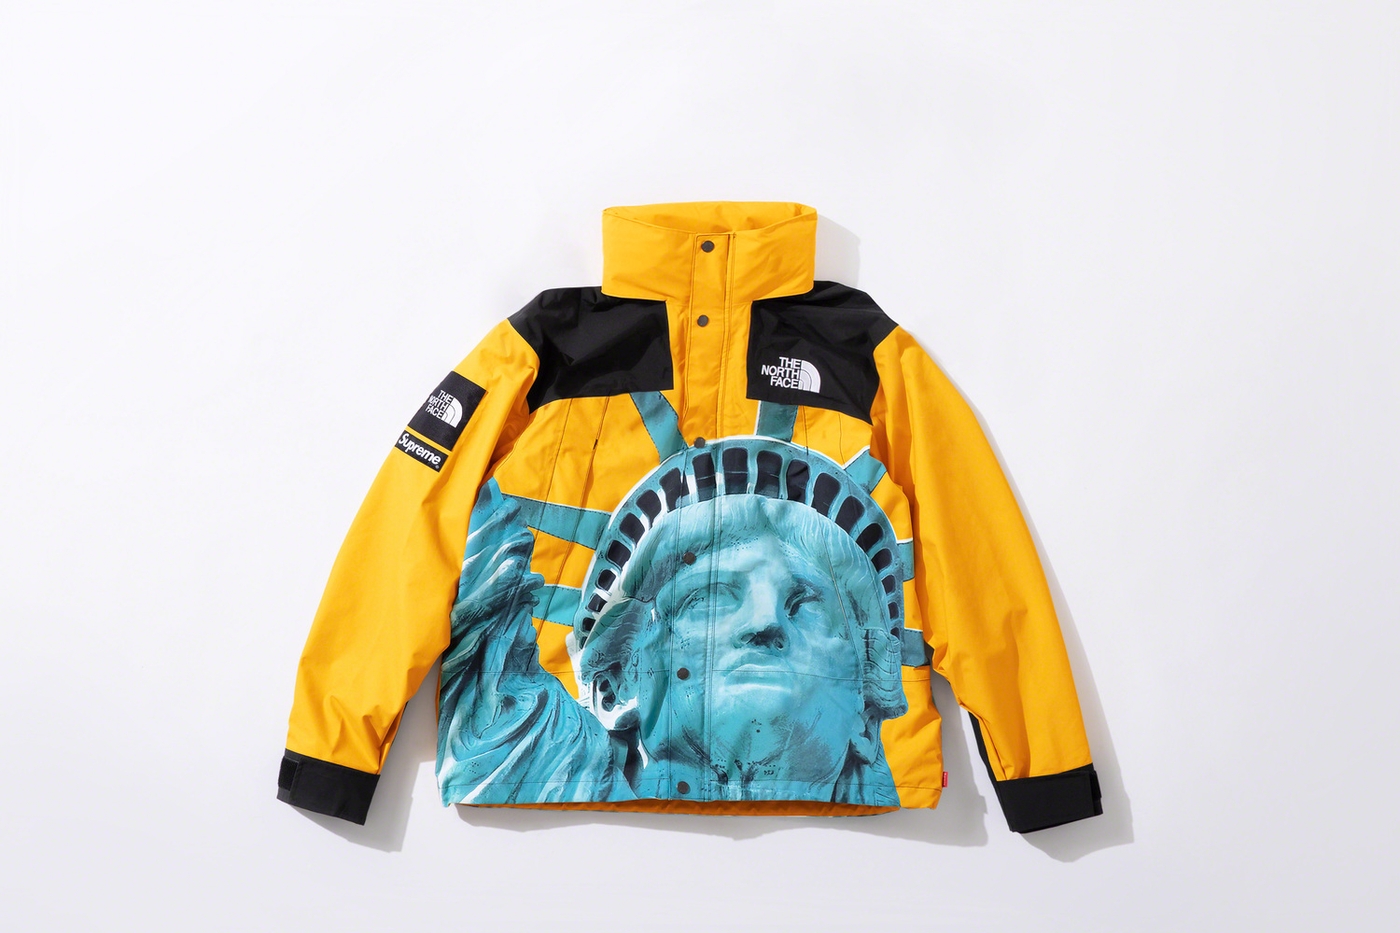 Statue of Liberty Mountain Jacket with packable hood. (19/29)